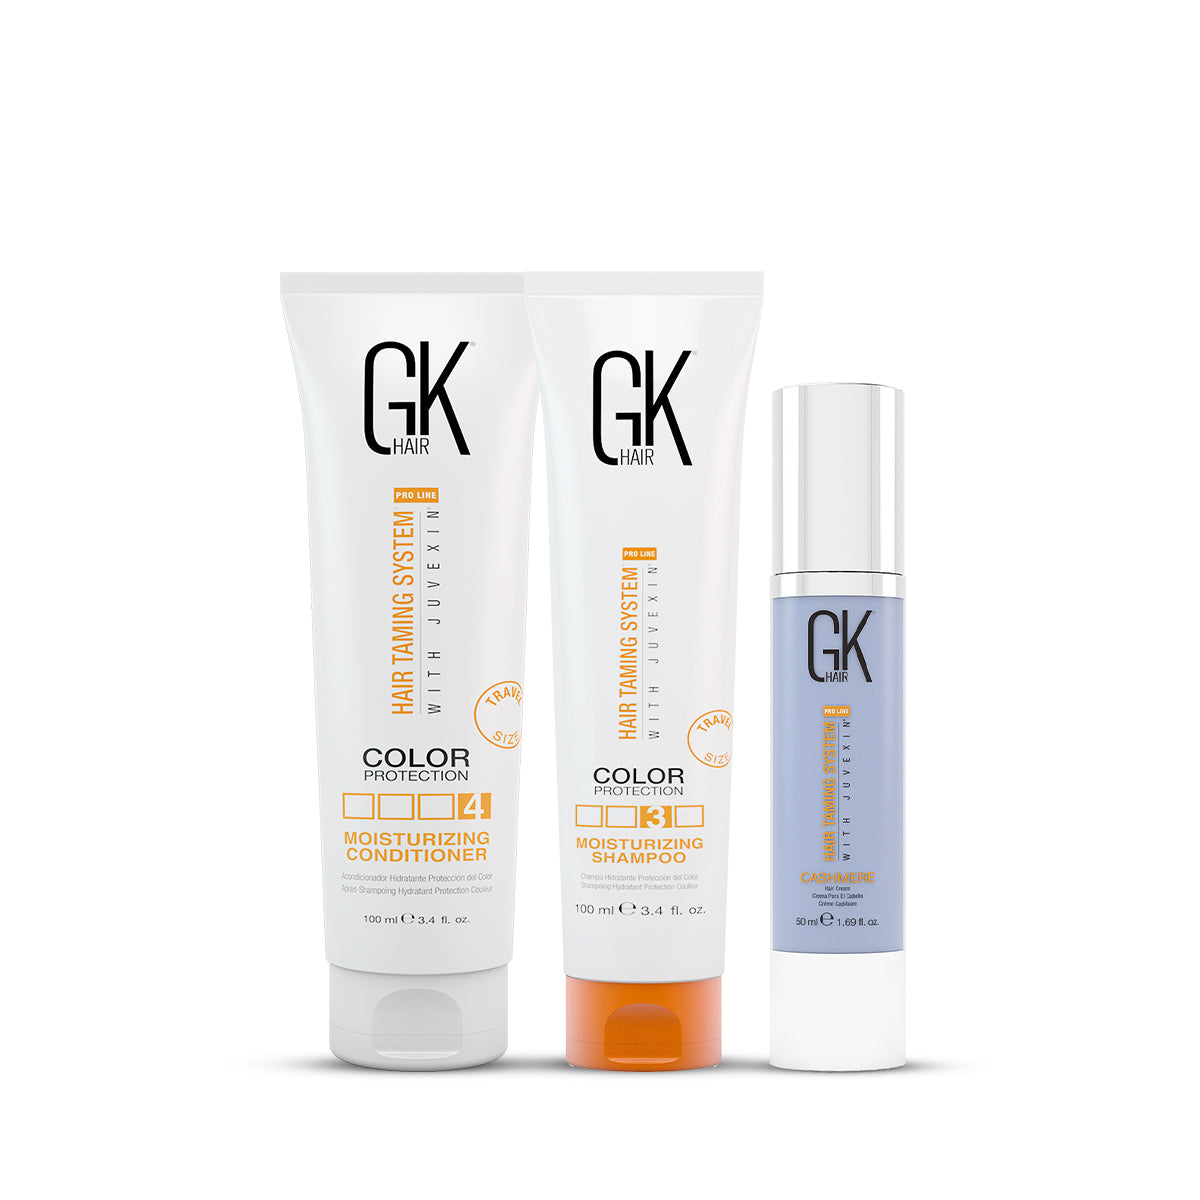 GK Hair Moisturizing Shampoo and Conditioner 100 Ml with Cashmere 50 Ml